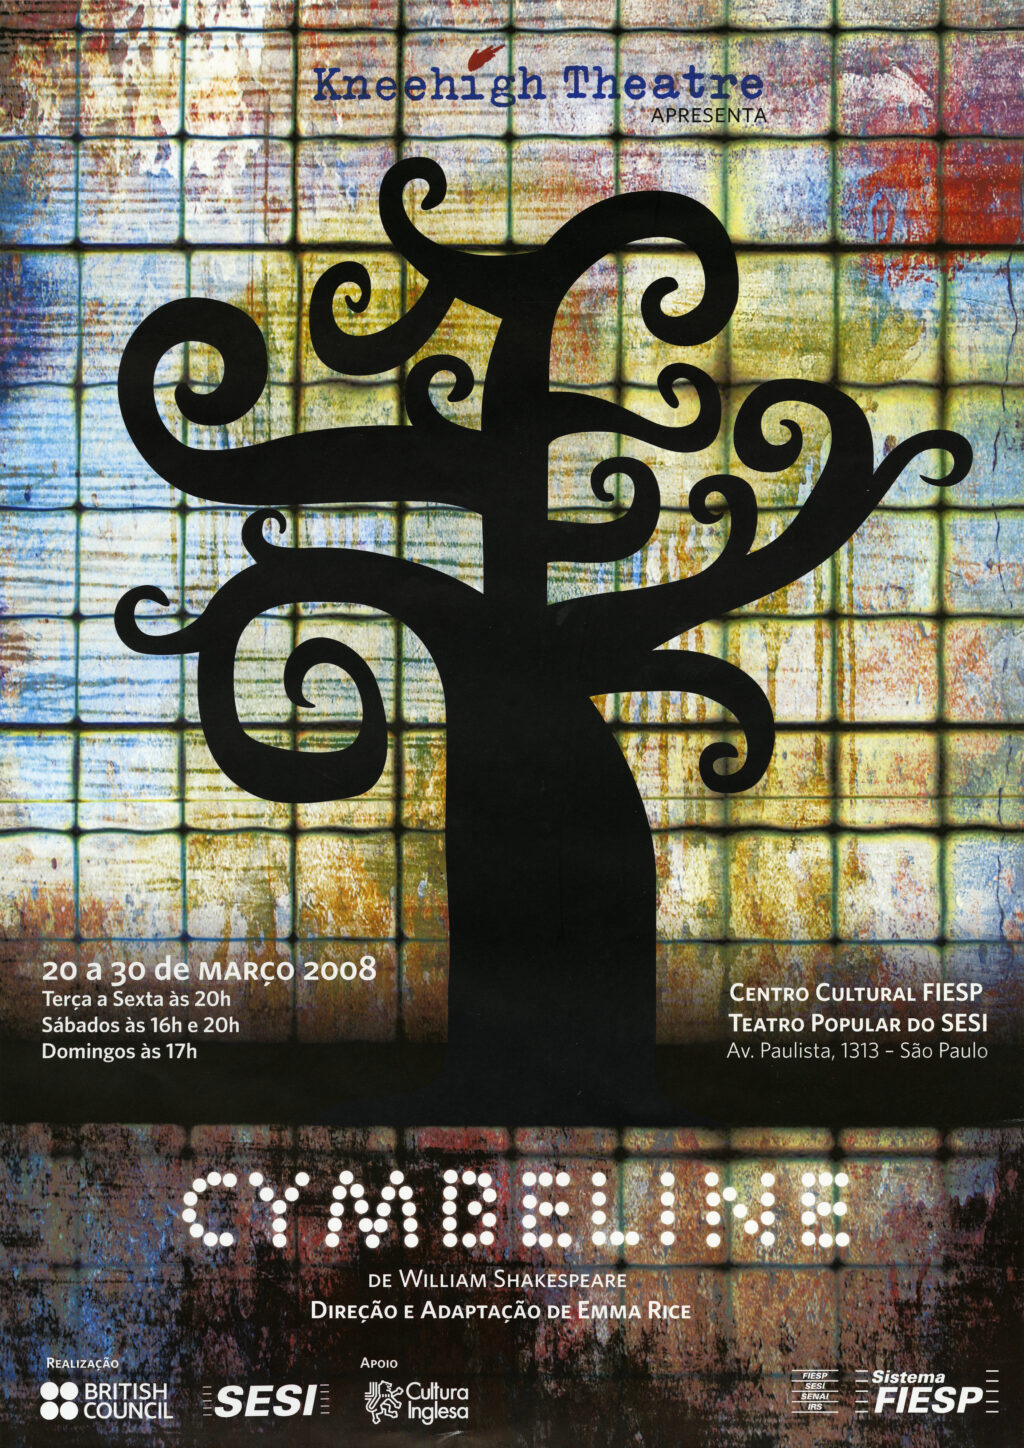 The image is a poster distributed as part of Kneehigh's performances of Cymbeline in Brazil. In the centre of the image is a large black silhouette of a tree. The tree does not have any leaves and its branches are arranged in swirls. The backdrop of the image is a multi-coloured wall of small square tiles. Above the tree in the centre of the image is the Kneehigh logo in a blue typewriter font. The bottom third of the image features the title 'Cymbeline' made up from small bright dots and other details about the date and time of the productions in Portuguese.